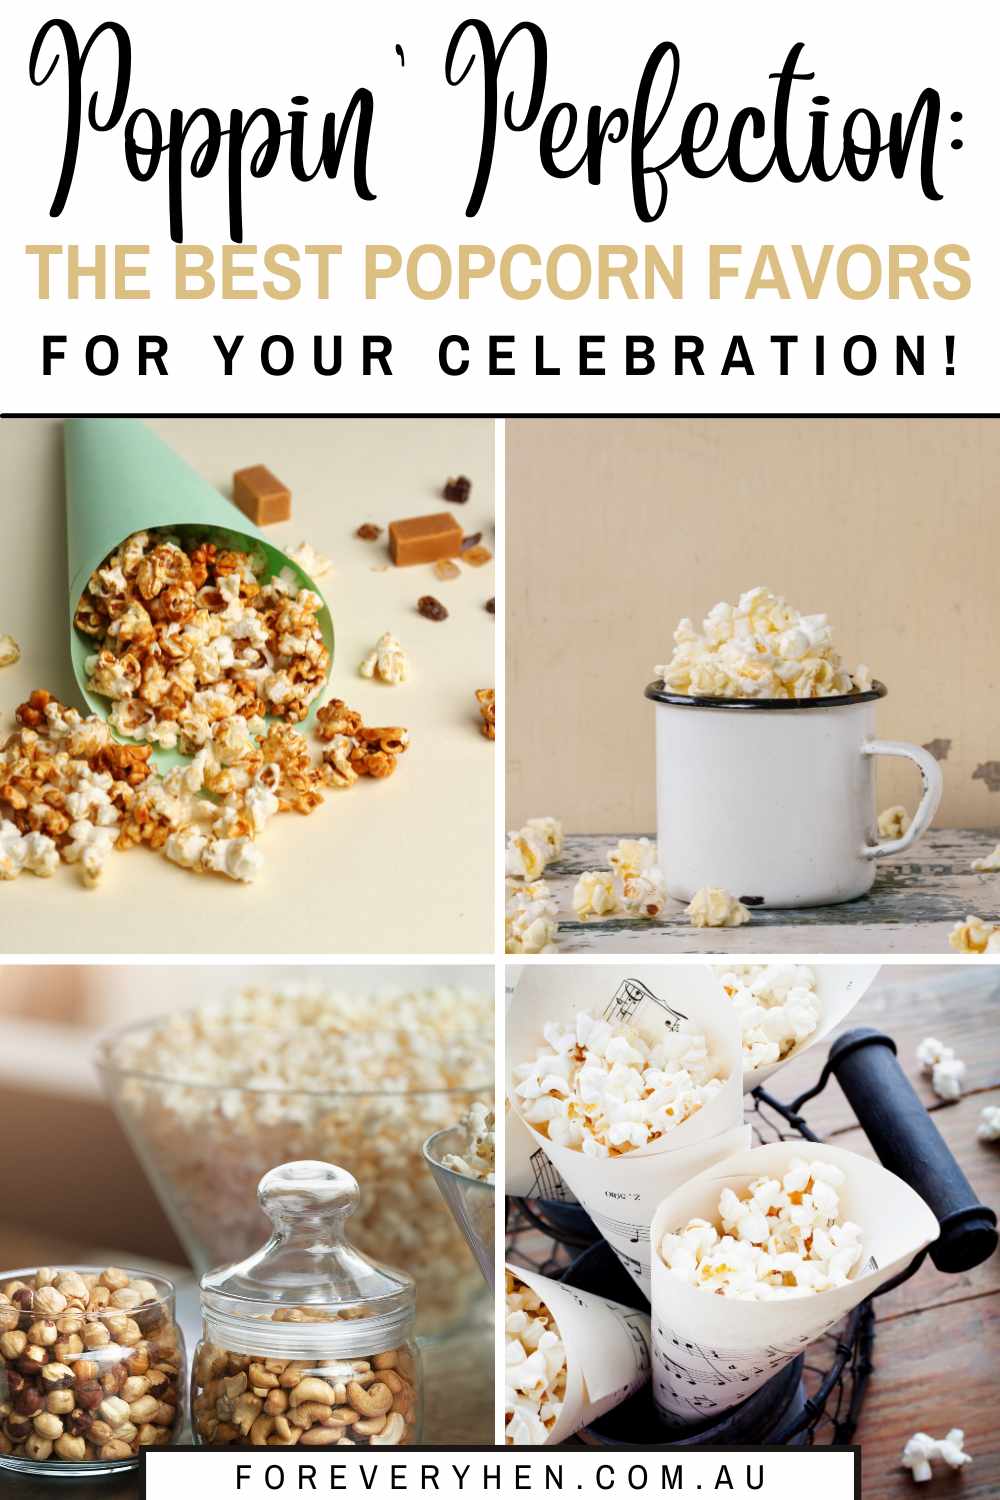 Collage of popcorn in paper cones, glass jars and mugs. Text overlay: Poppin' perfection - the best popcorn favors for your celebration!